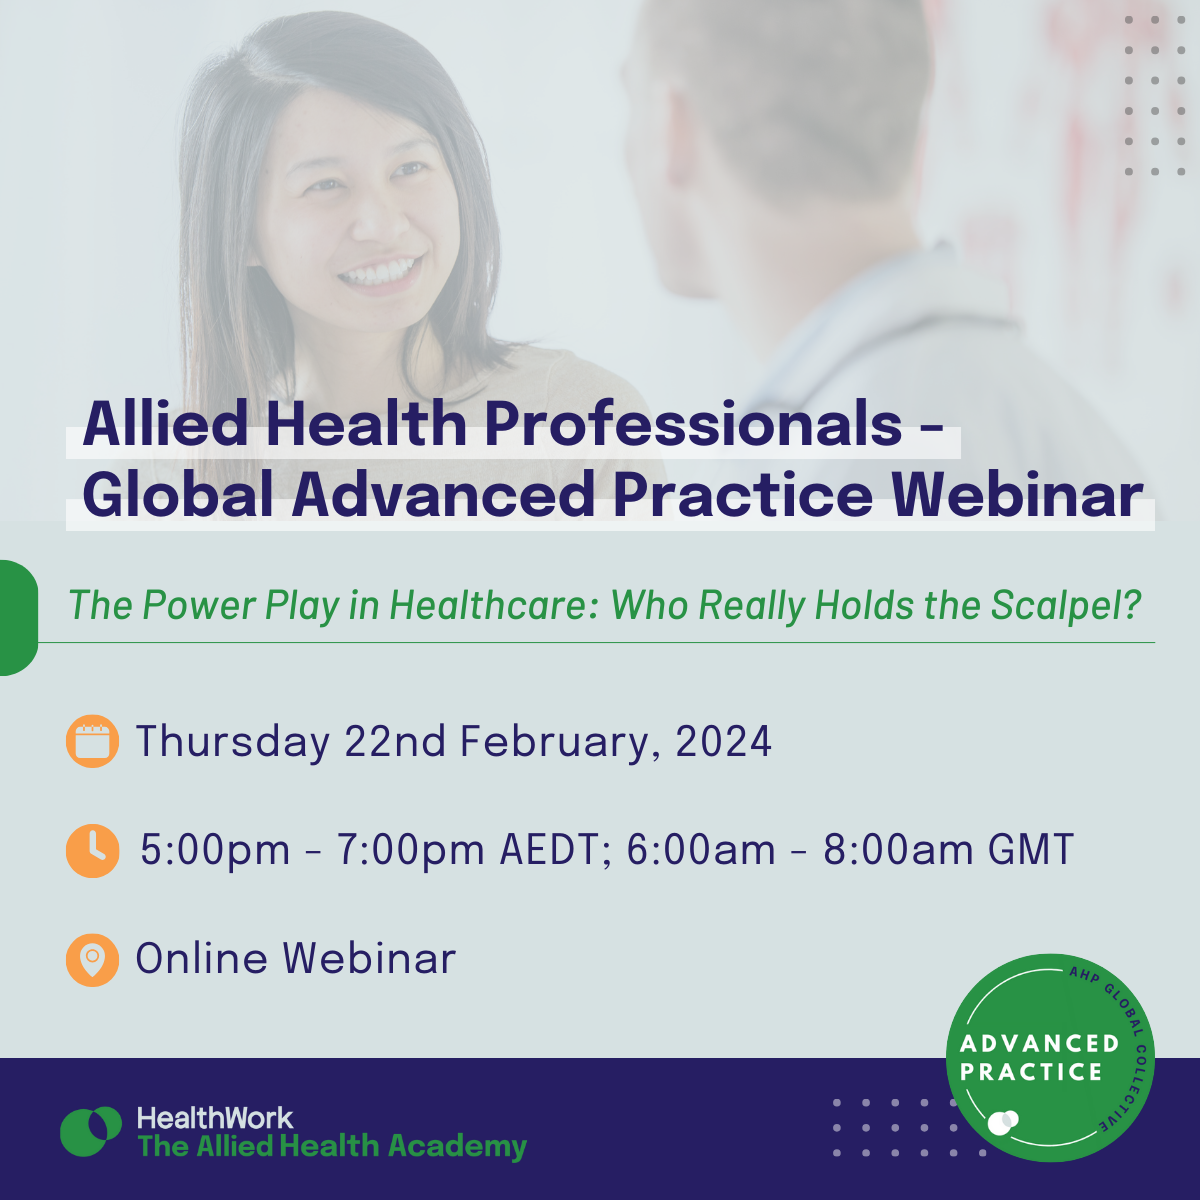 AHP Advanced Practice Collective Webinar - The Power Play in Healthcare: Who Really Holds the Scalpel?